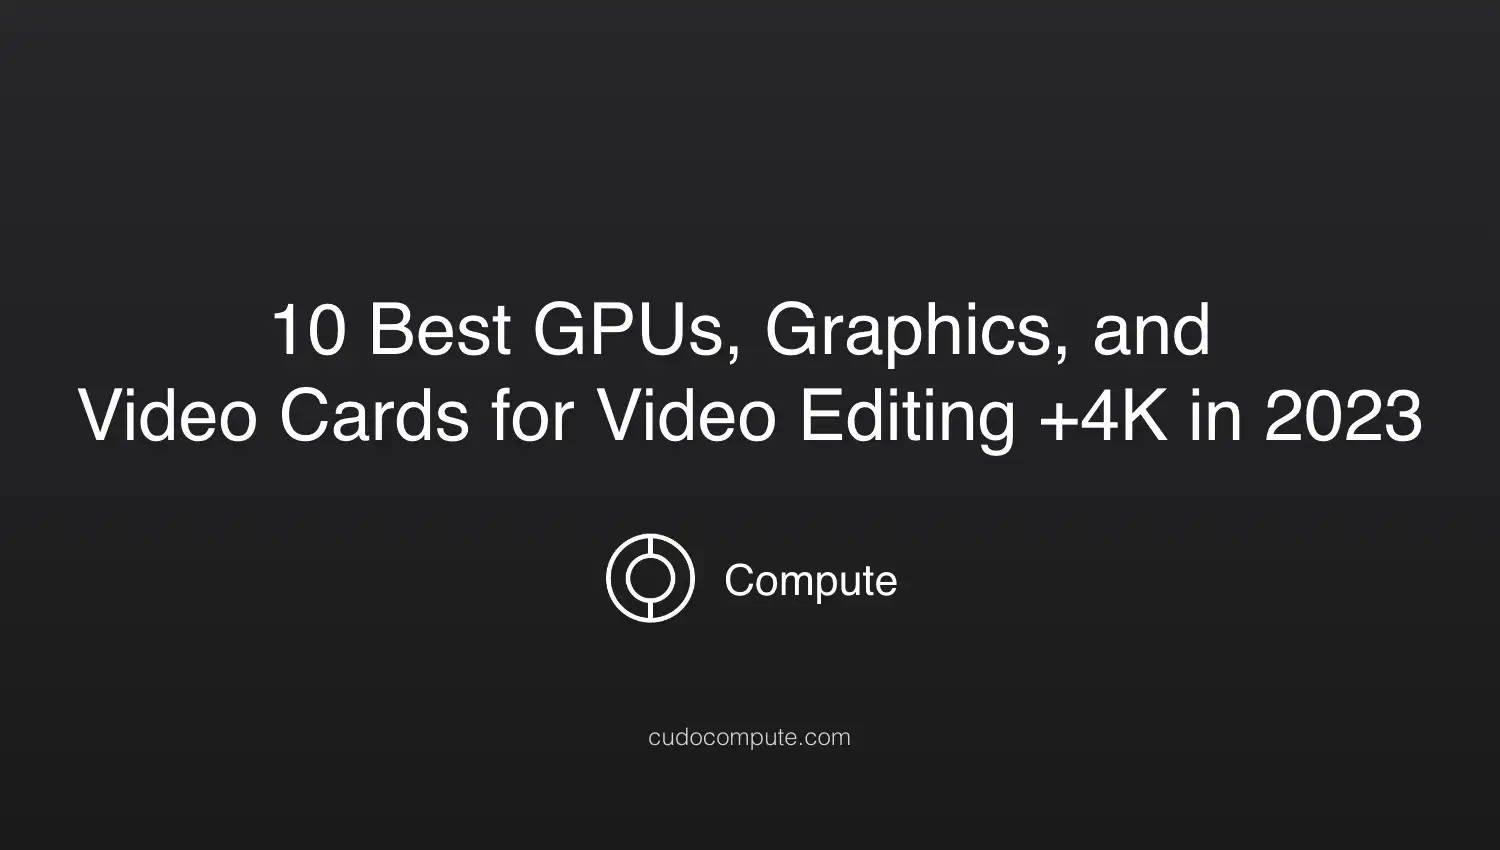 10 best GPUs, graphics, and video cards for video editing 4K+ in 2023 cover photo